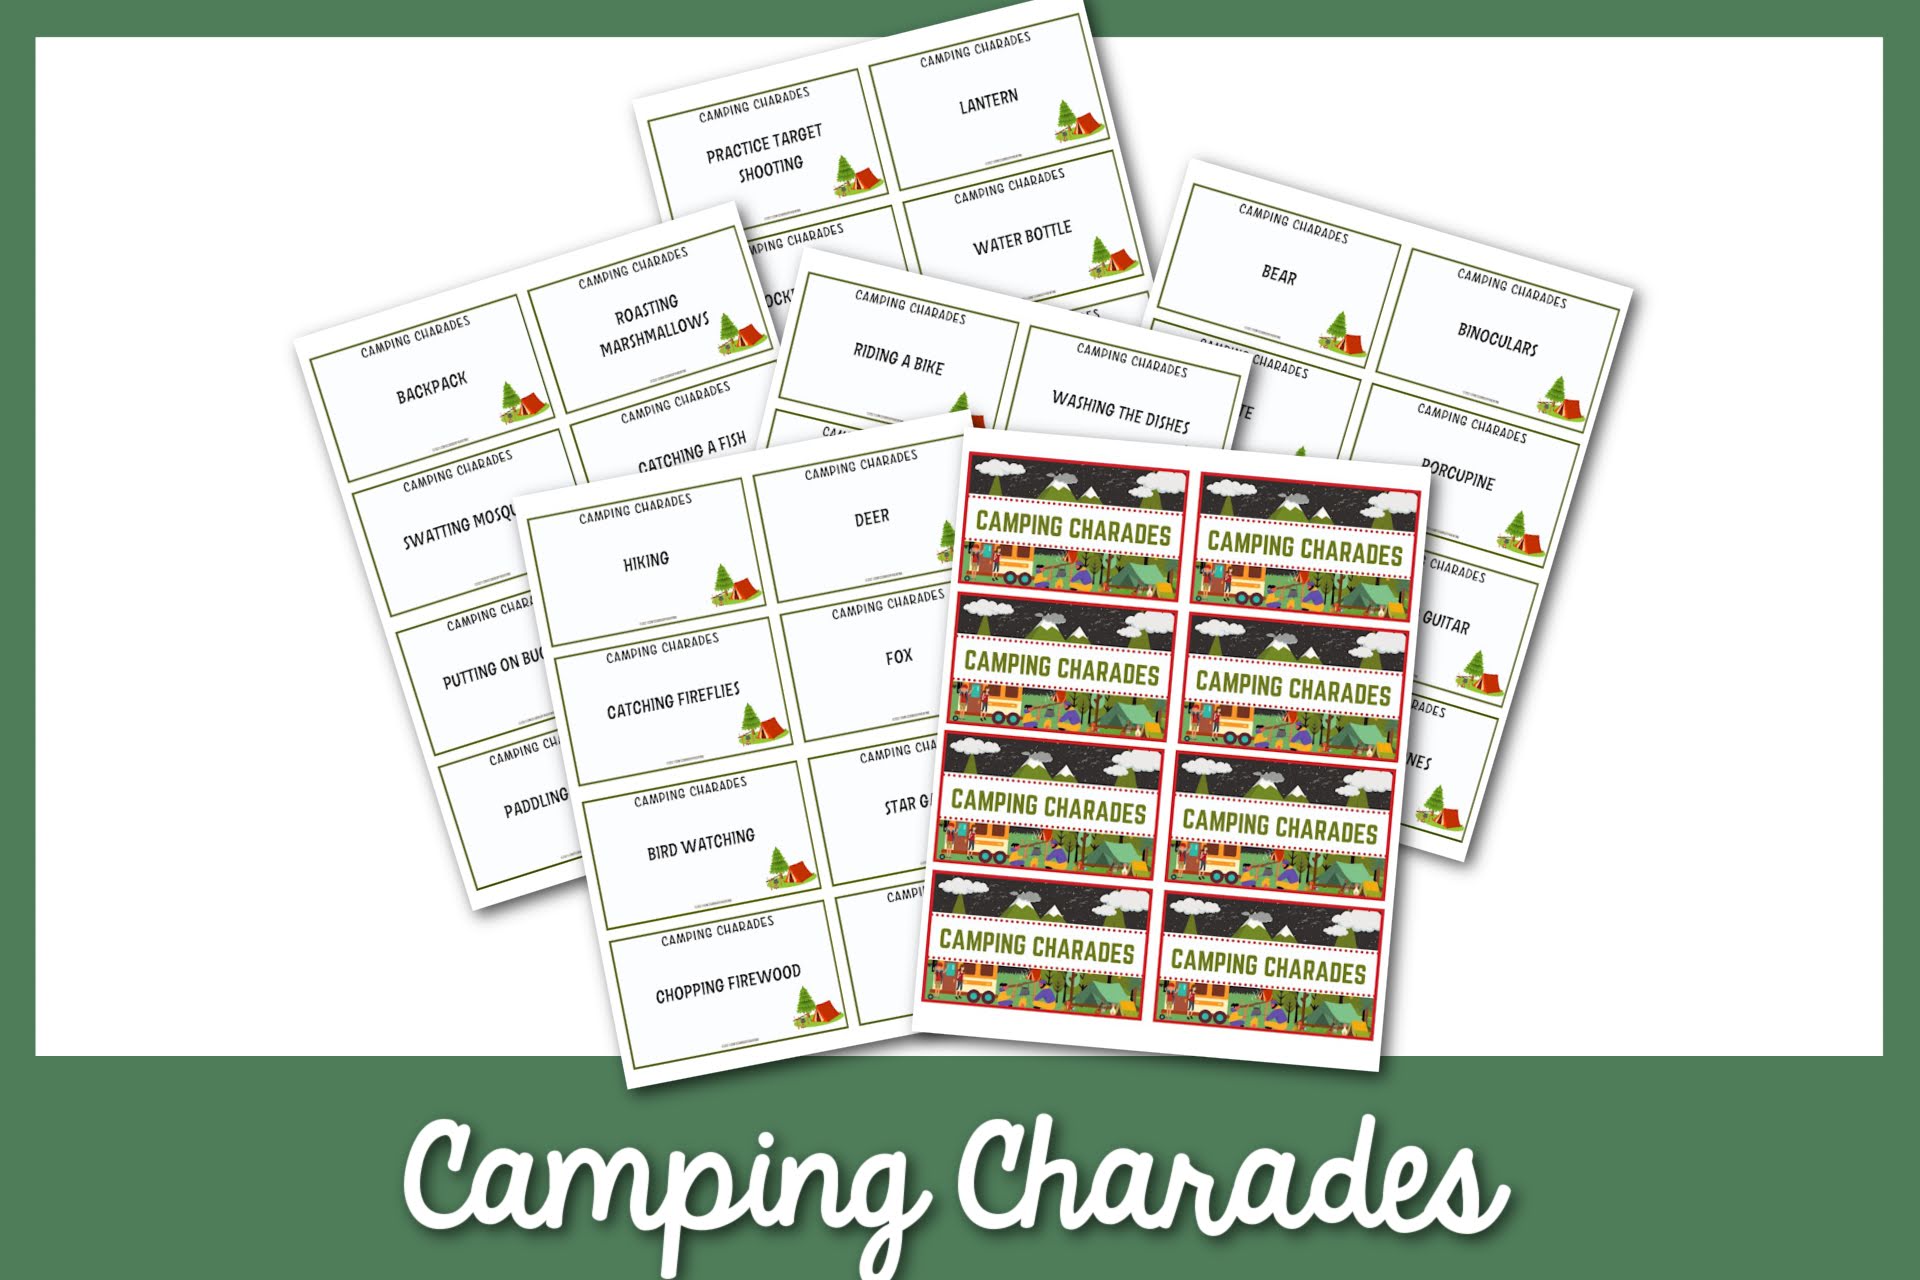 feature image: Camping Charades on a green border